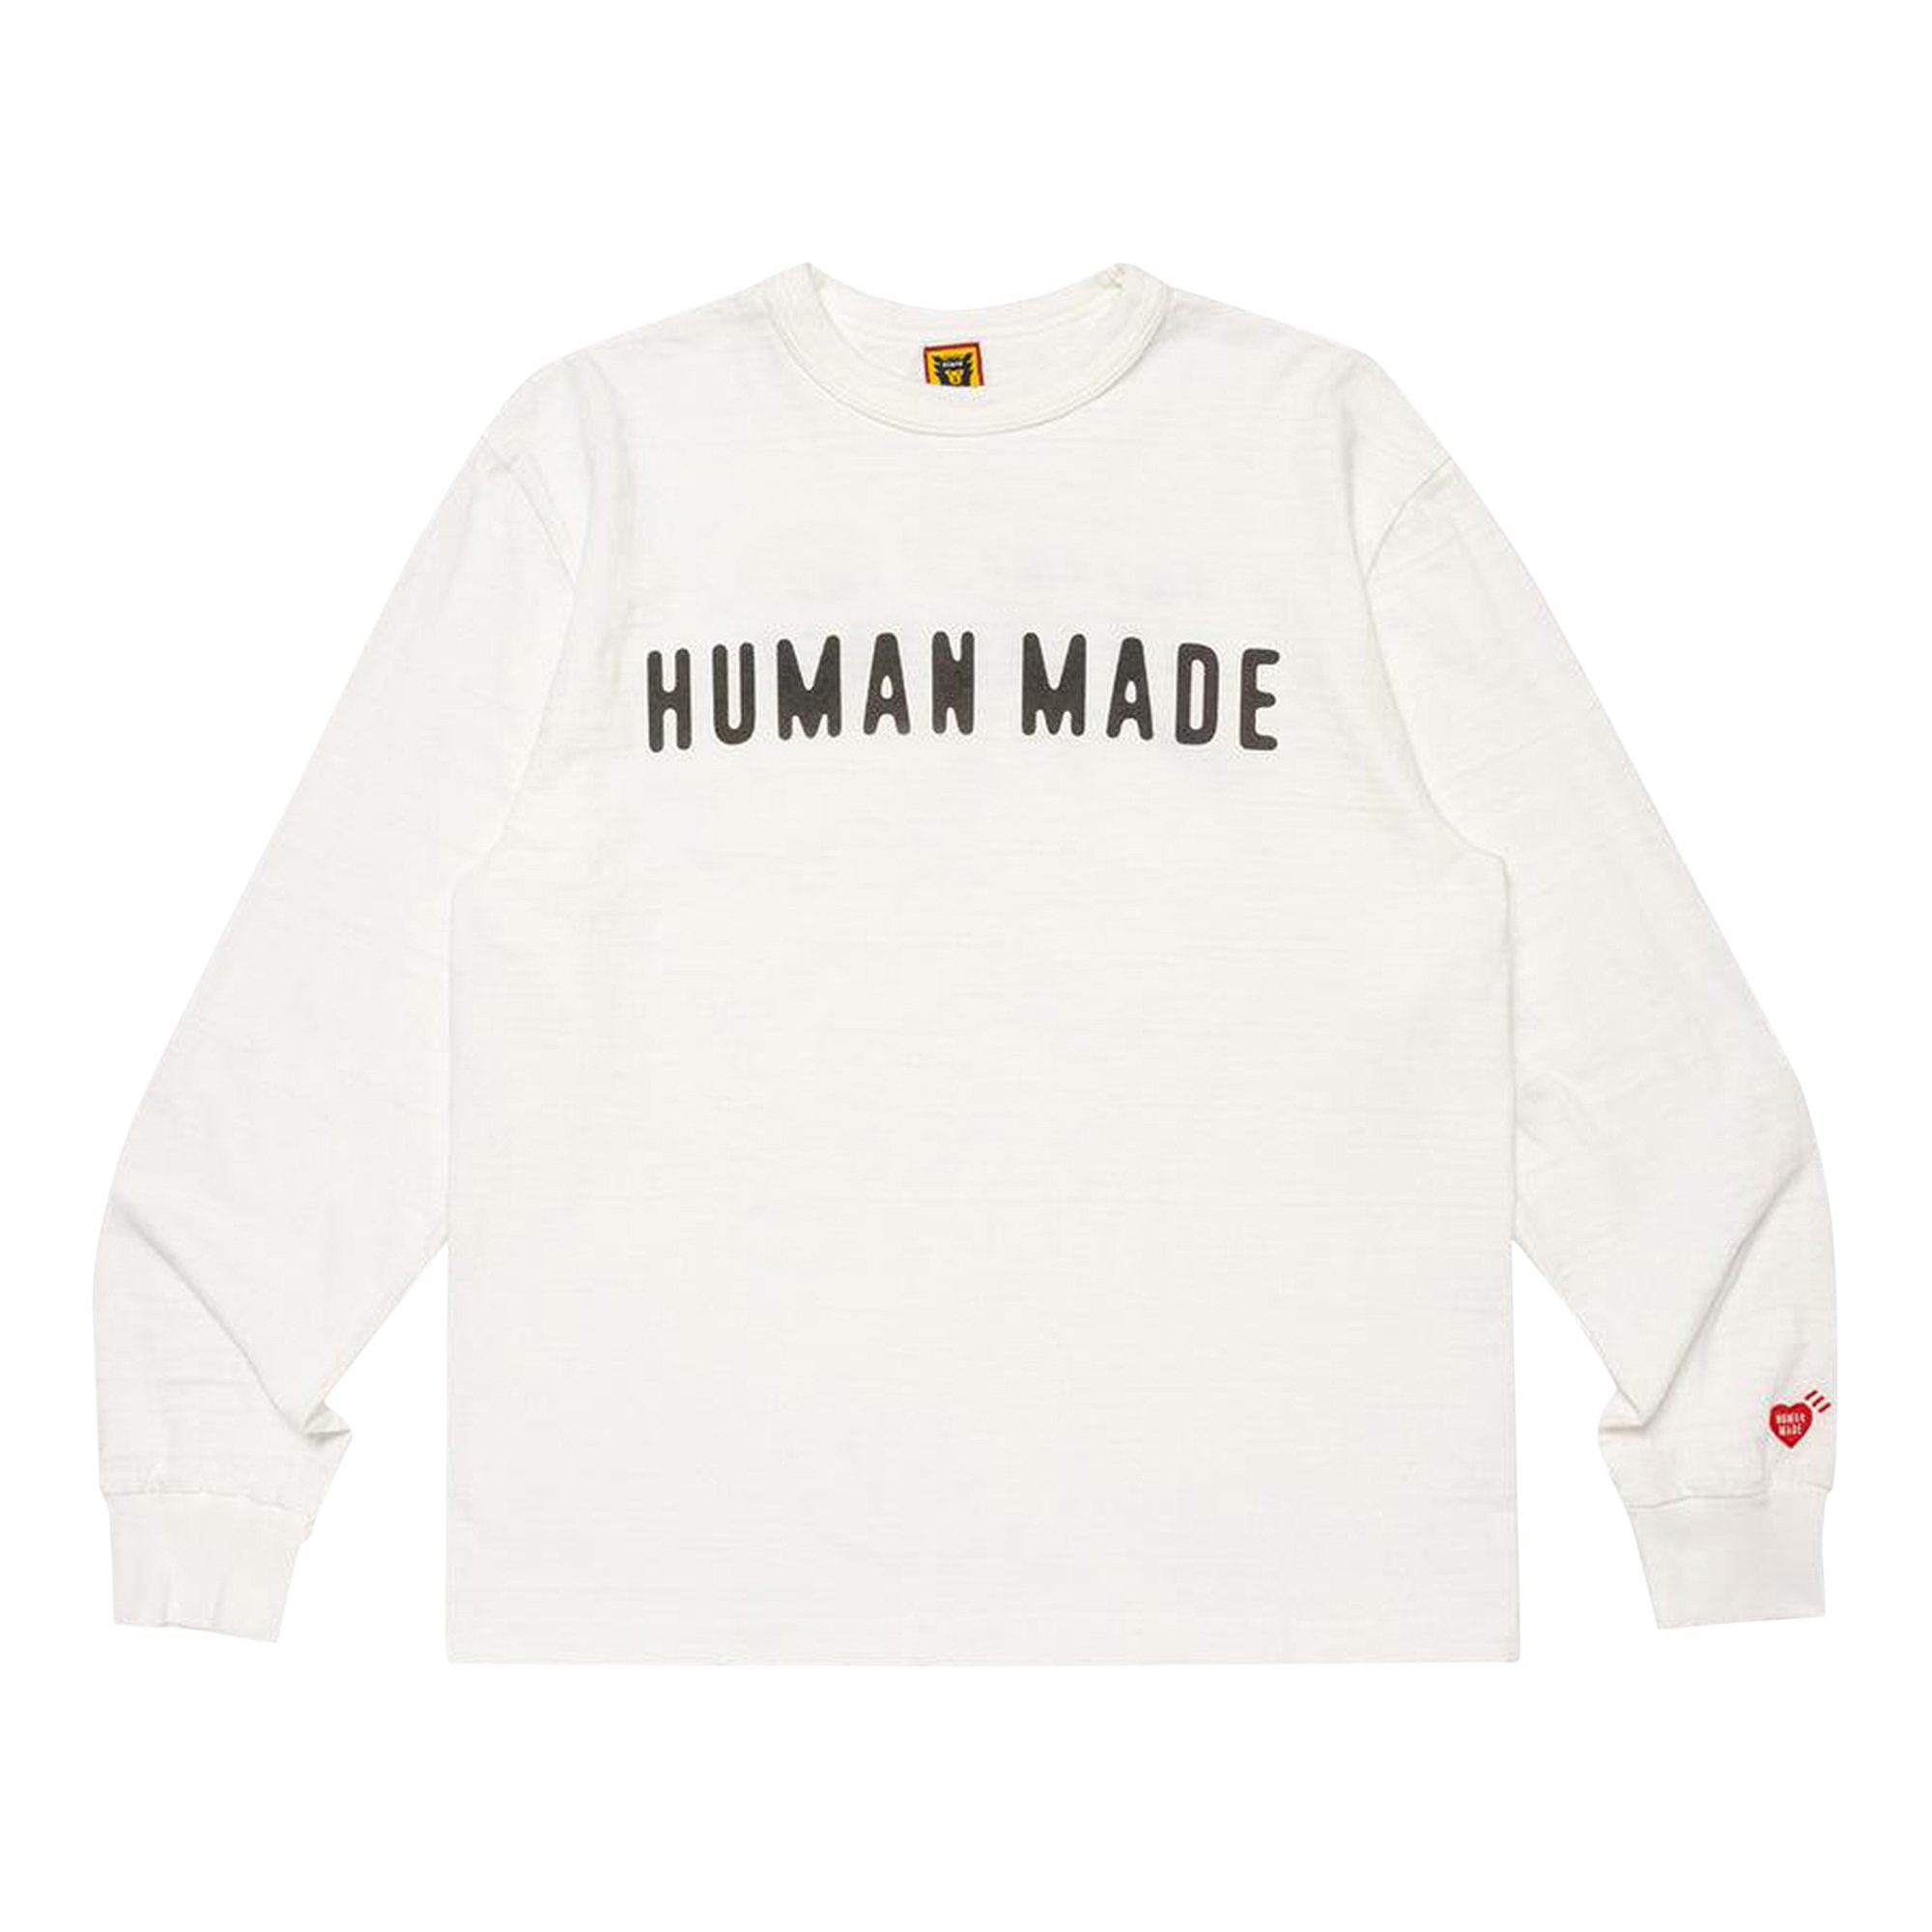 Human Made Graphic Long-Sleeve T-Shirt 'White'